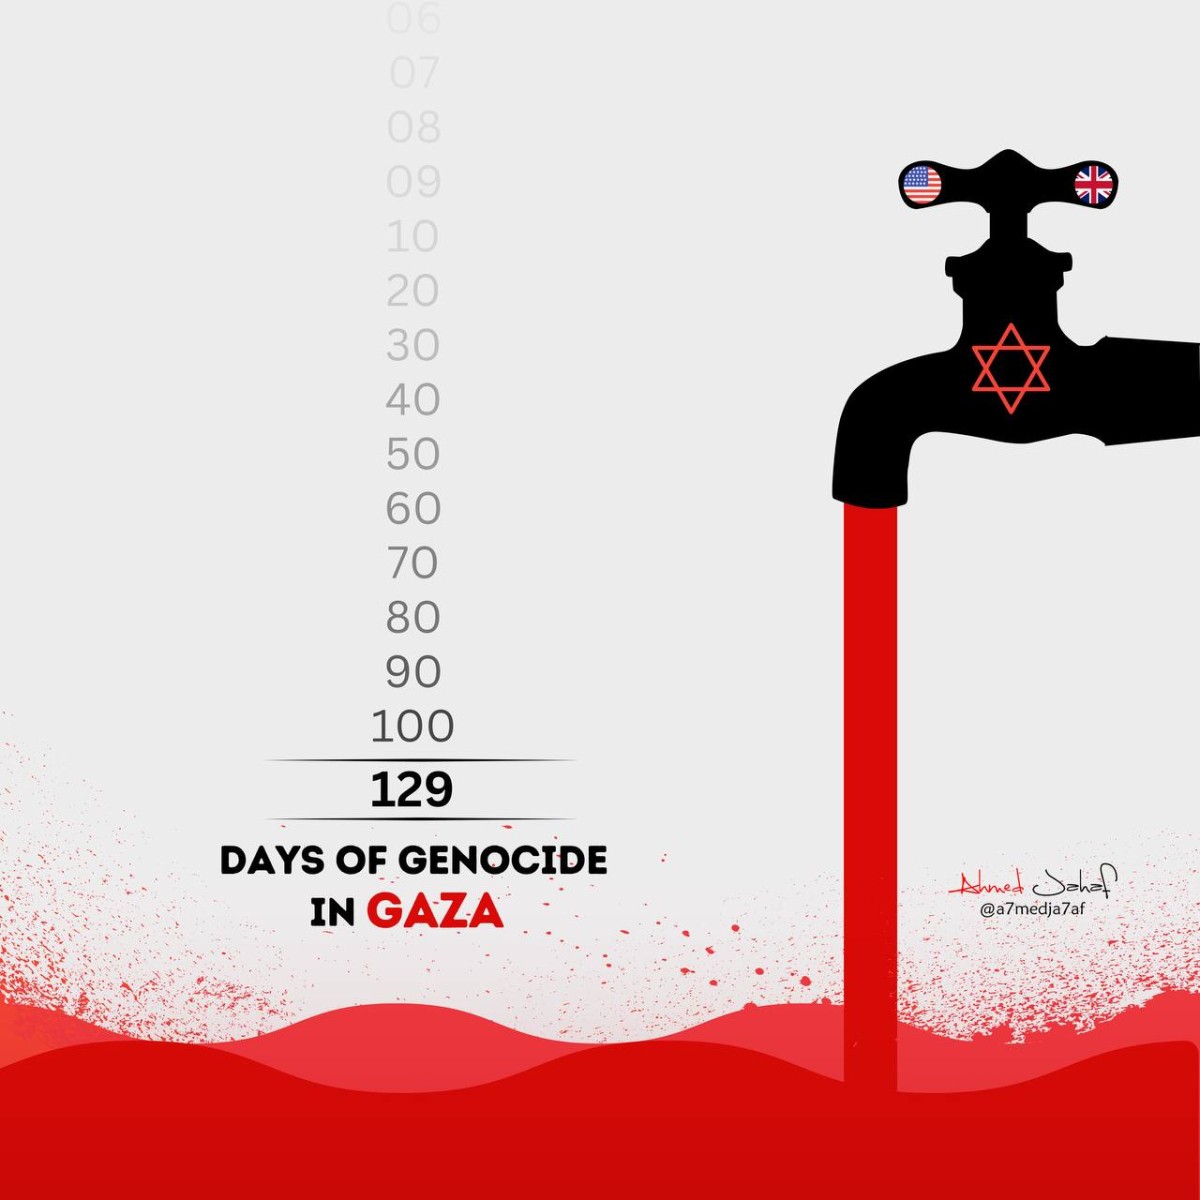 129 days of genocide in Gaza, by the Zionist entity “Israel” with US and UK support